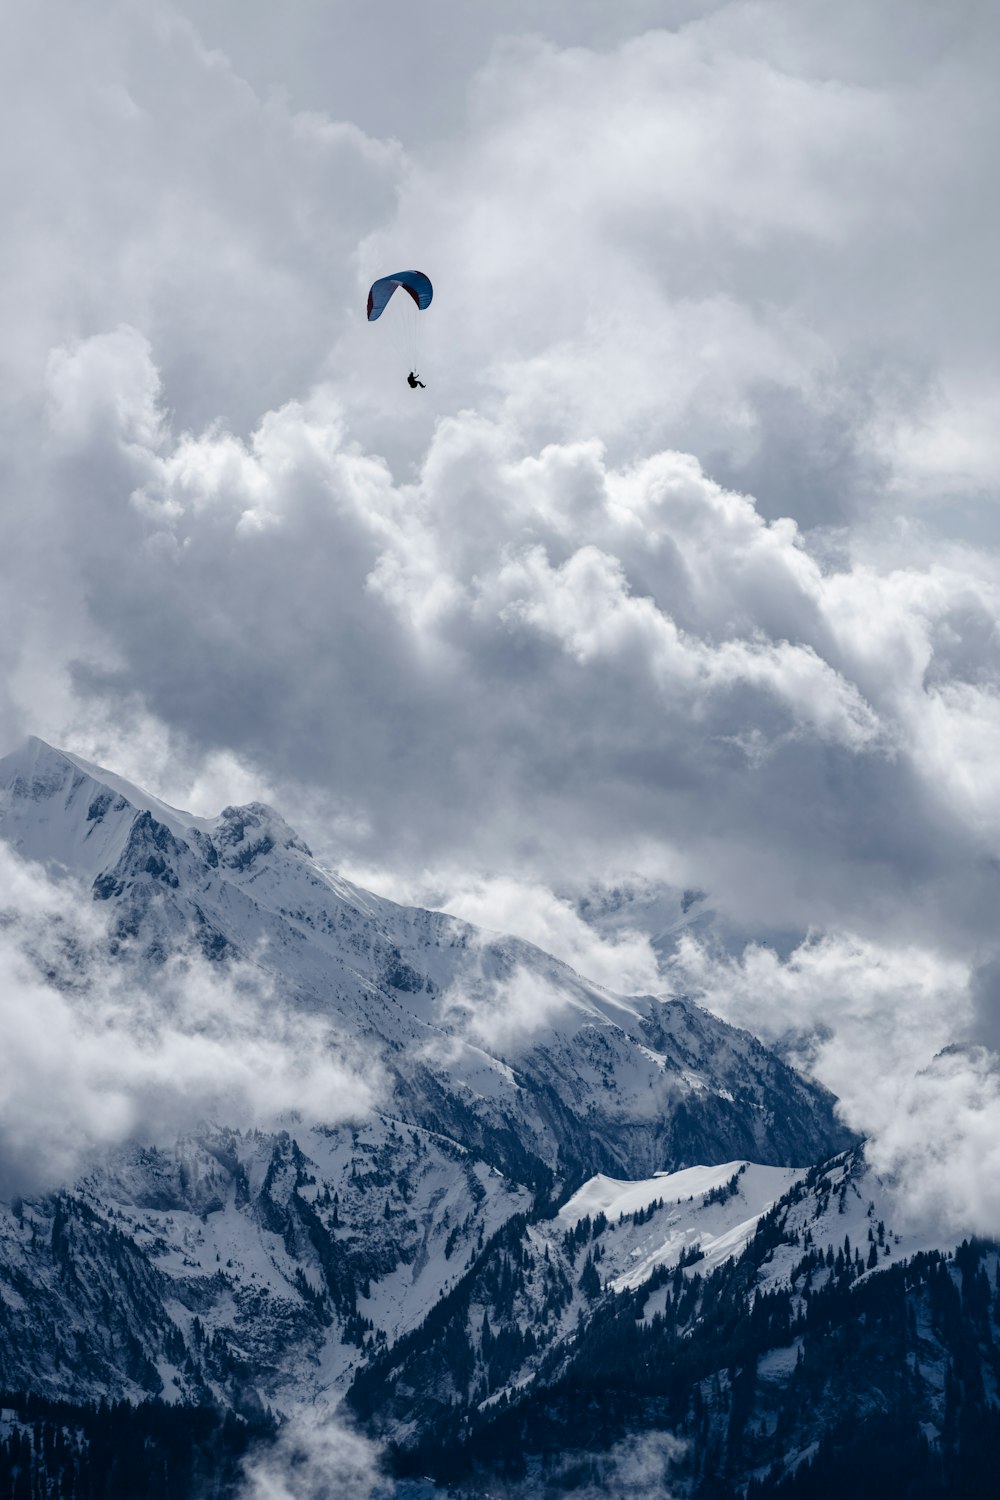 a paraglider flying over a mountain range under a cloudy sky